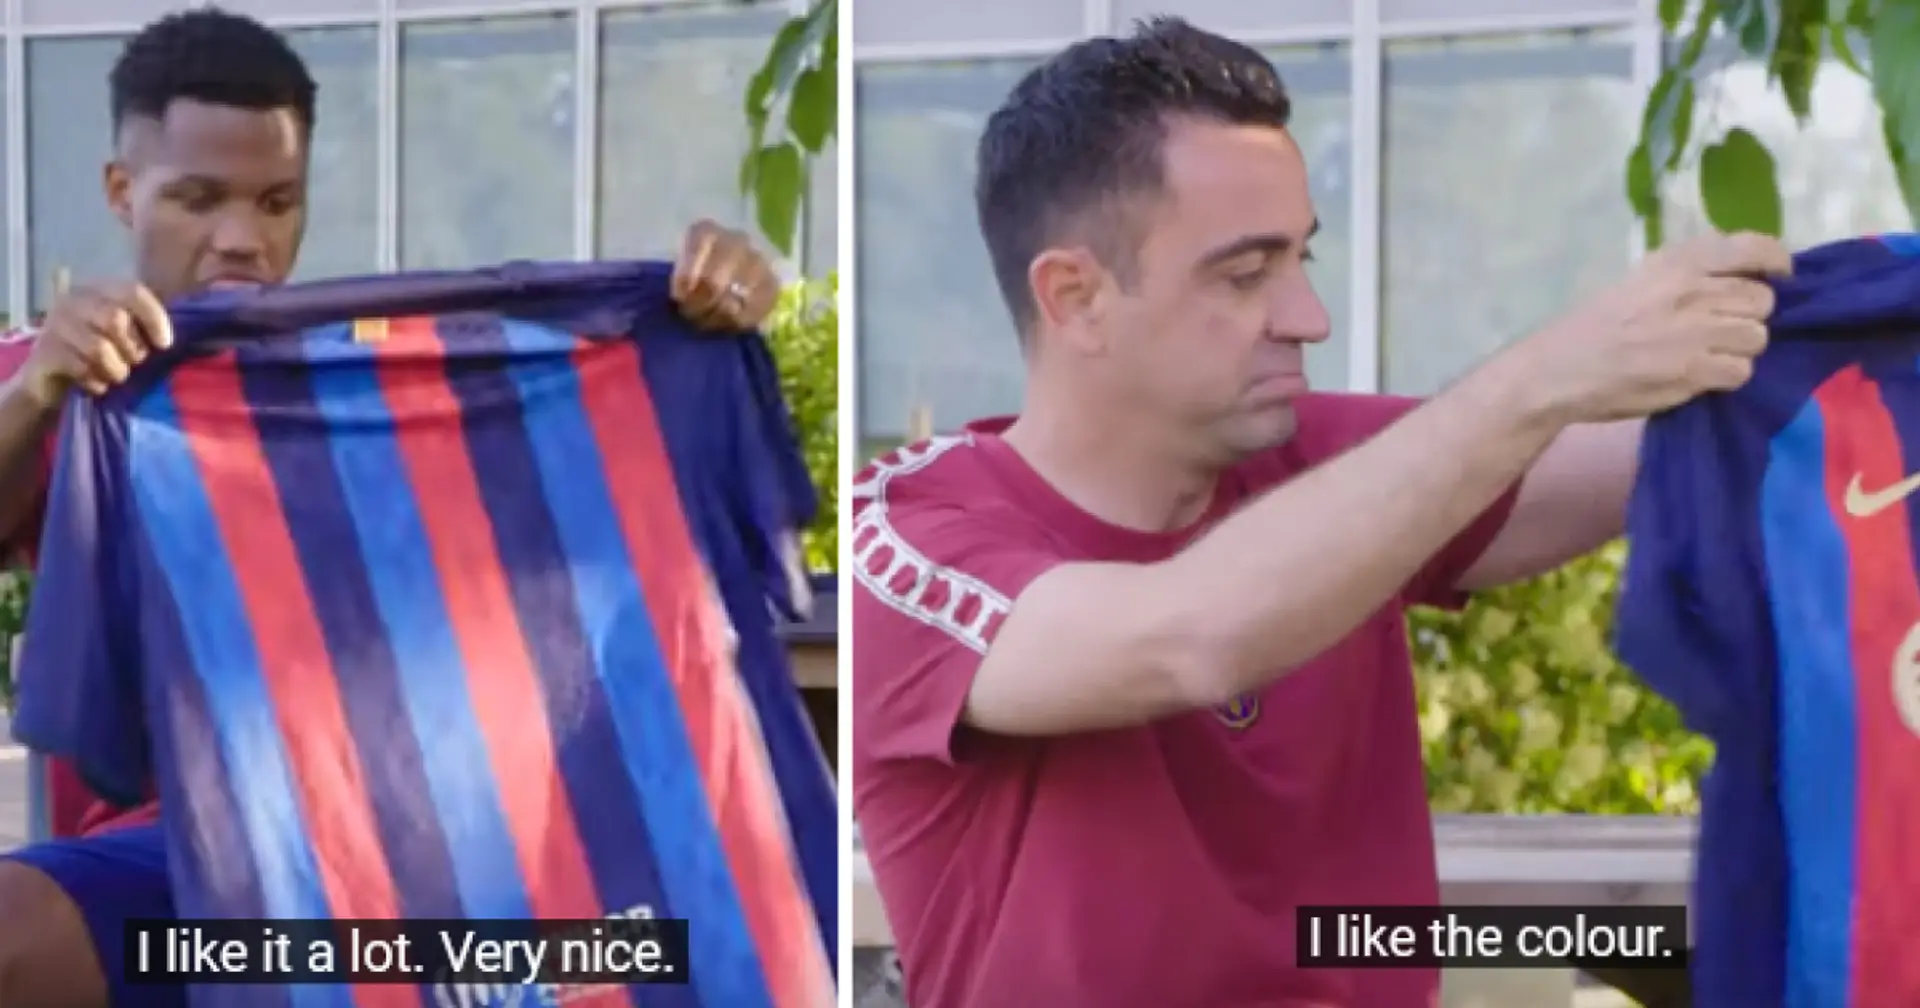 Spotted: Xavi and Fati's first reaction to new Barca kit